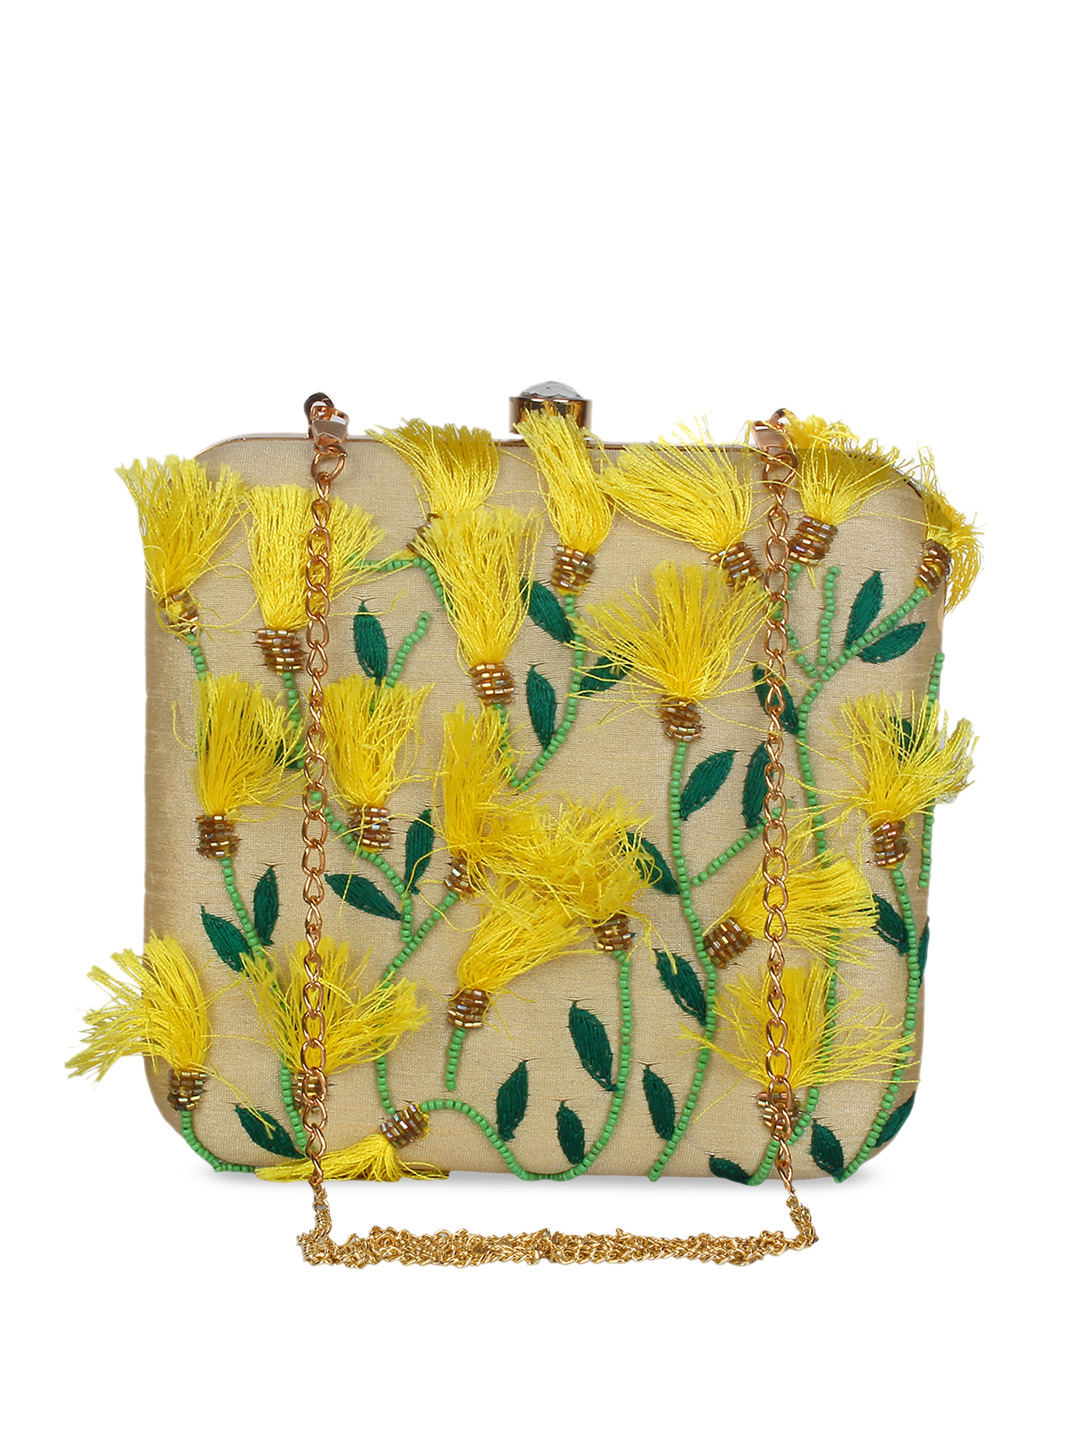 EMBROIDERED METAL FRAME CLUTCH